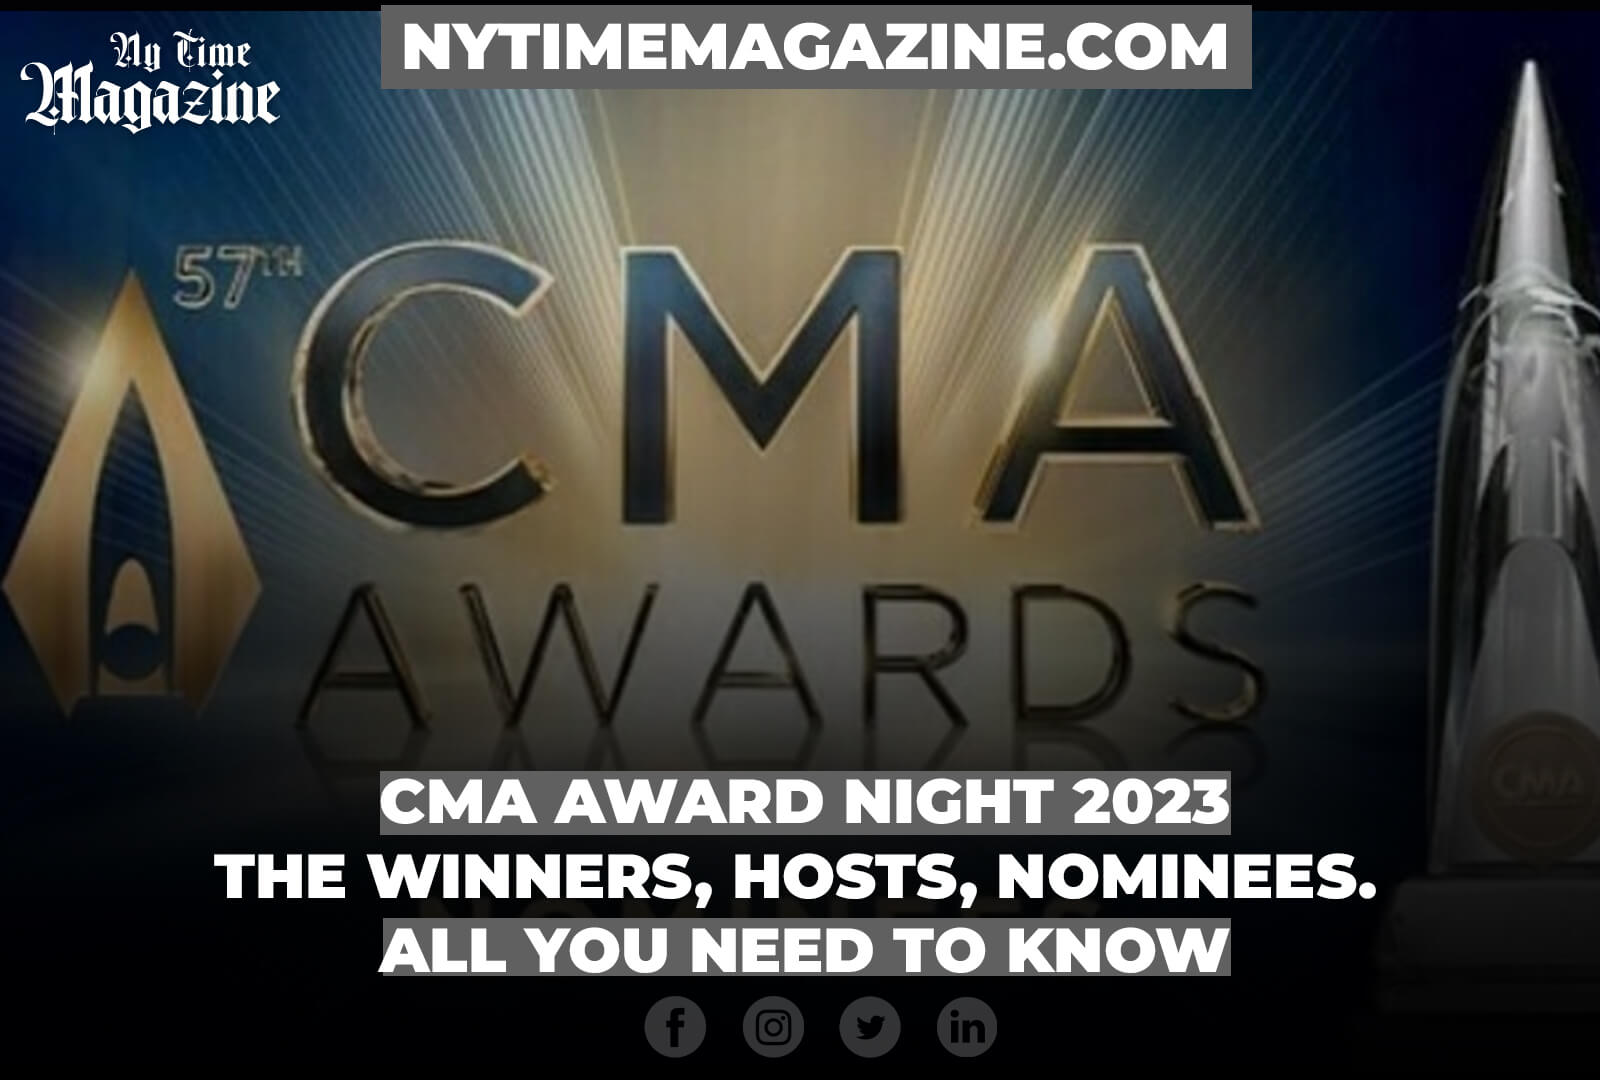 CMA Award Night 2023: The Winners, Hosts, Nominees. All You Need to Know